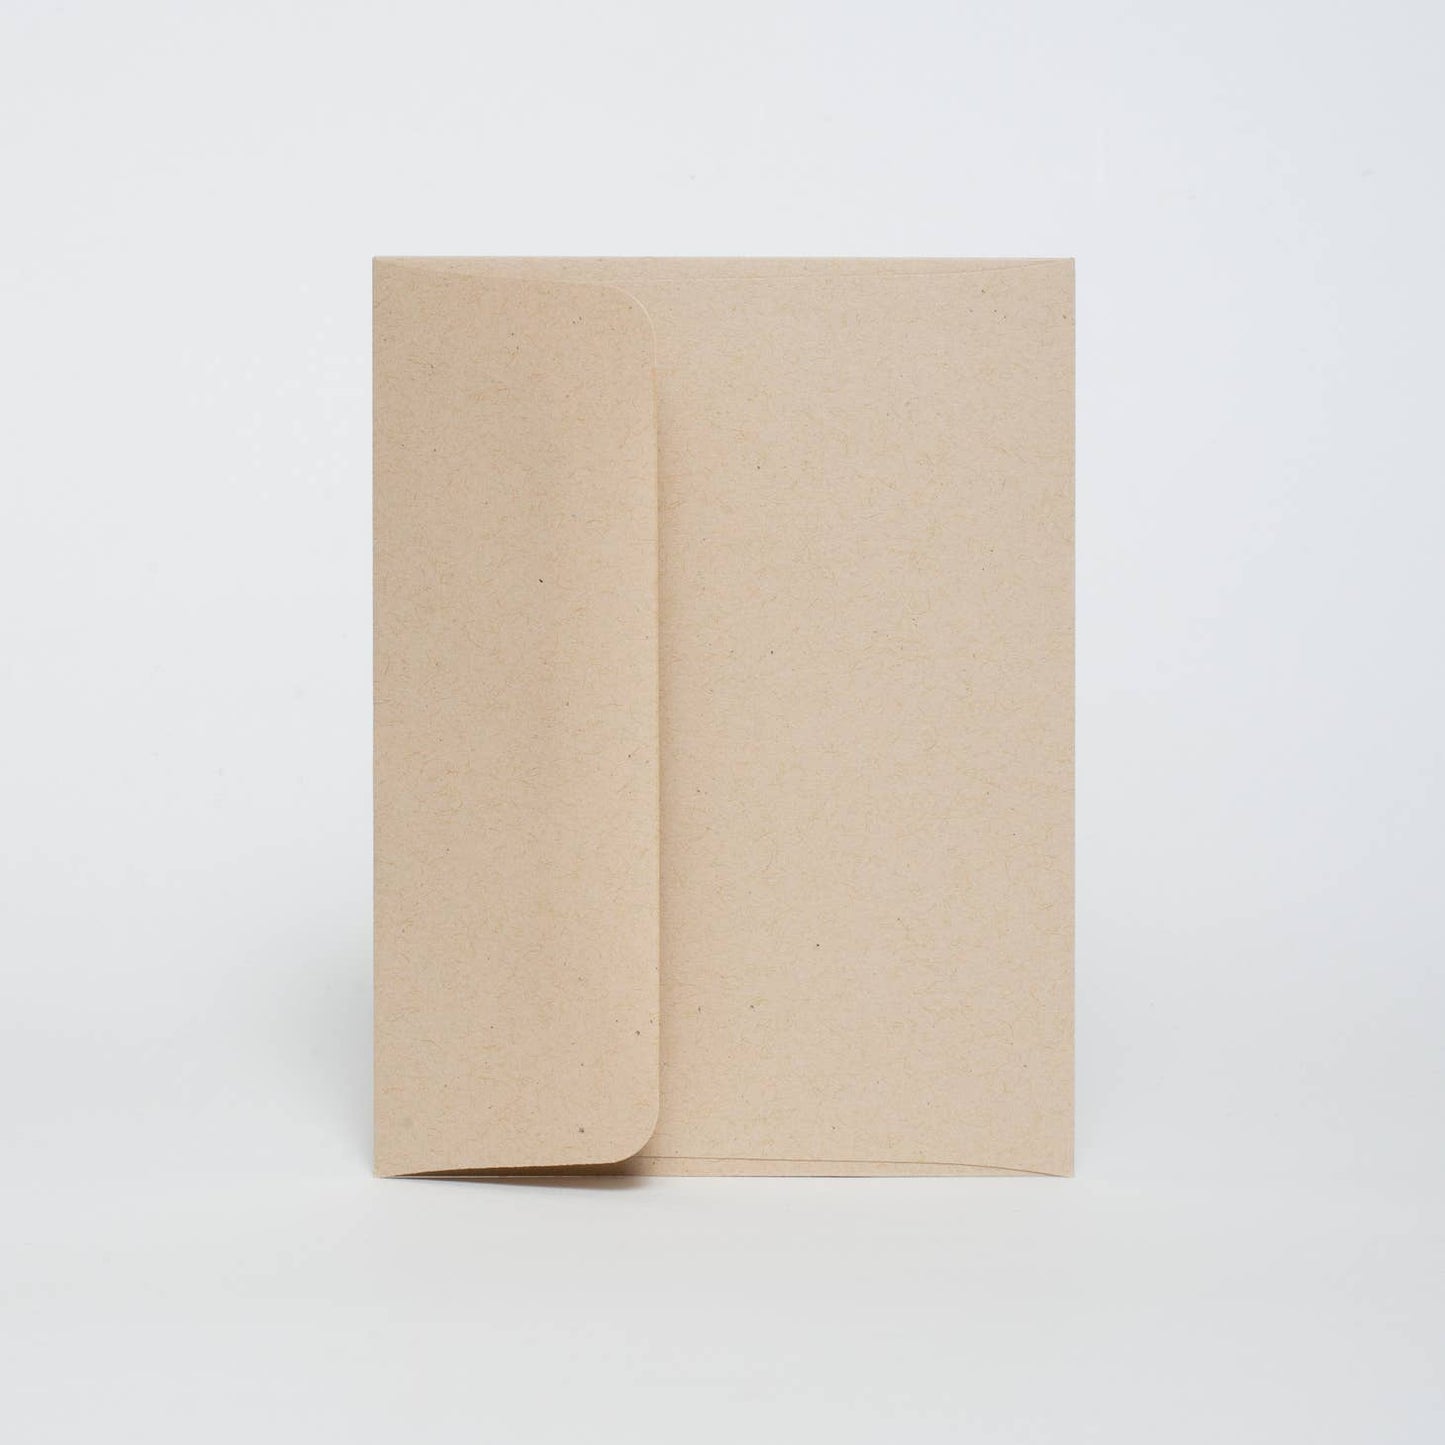 The included envelope for the card comes in kraft.